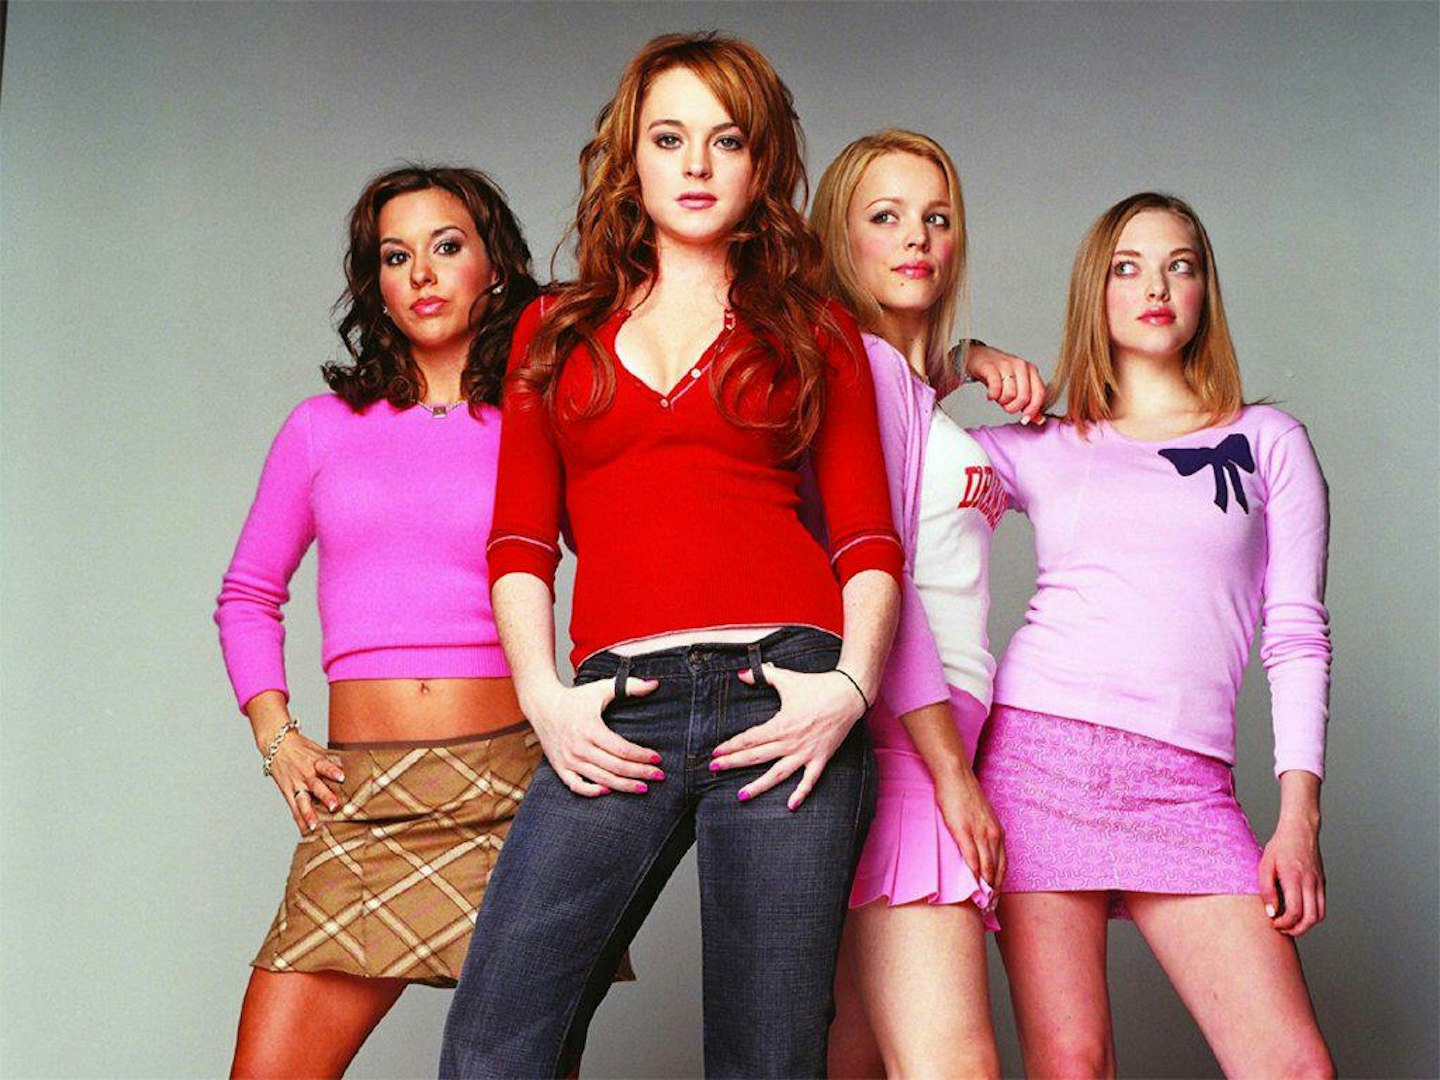 Mean Girls' Stars: Where Are They Now?